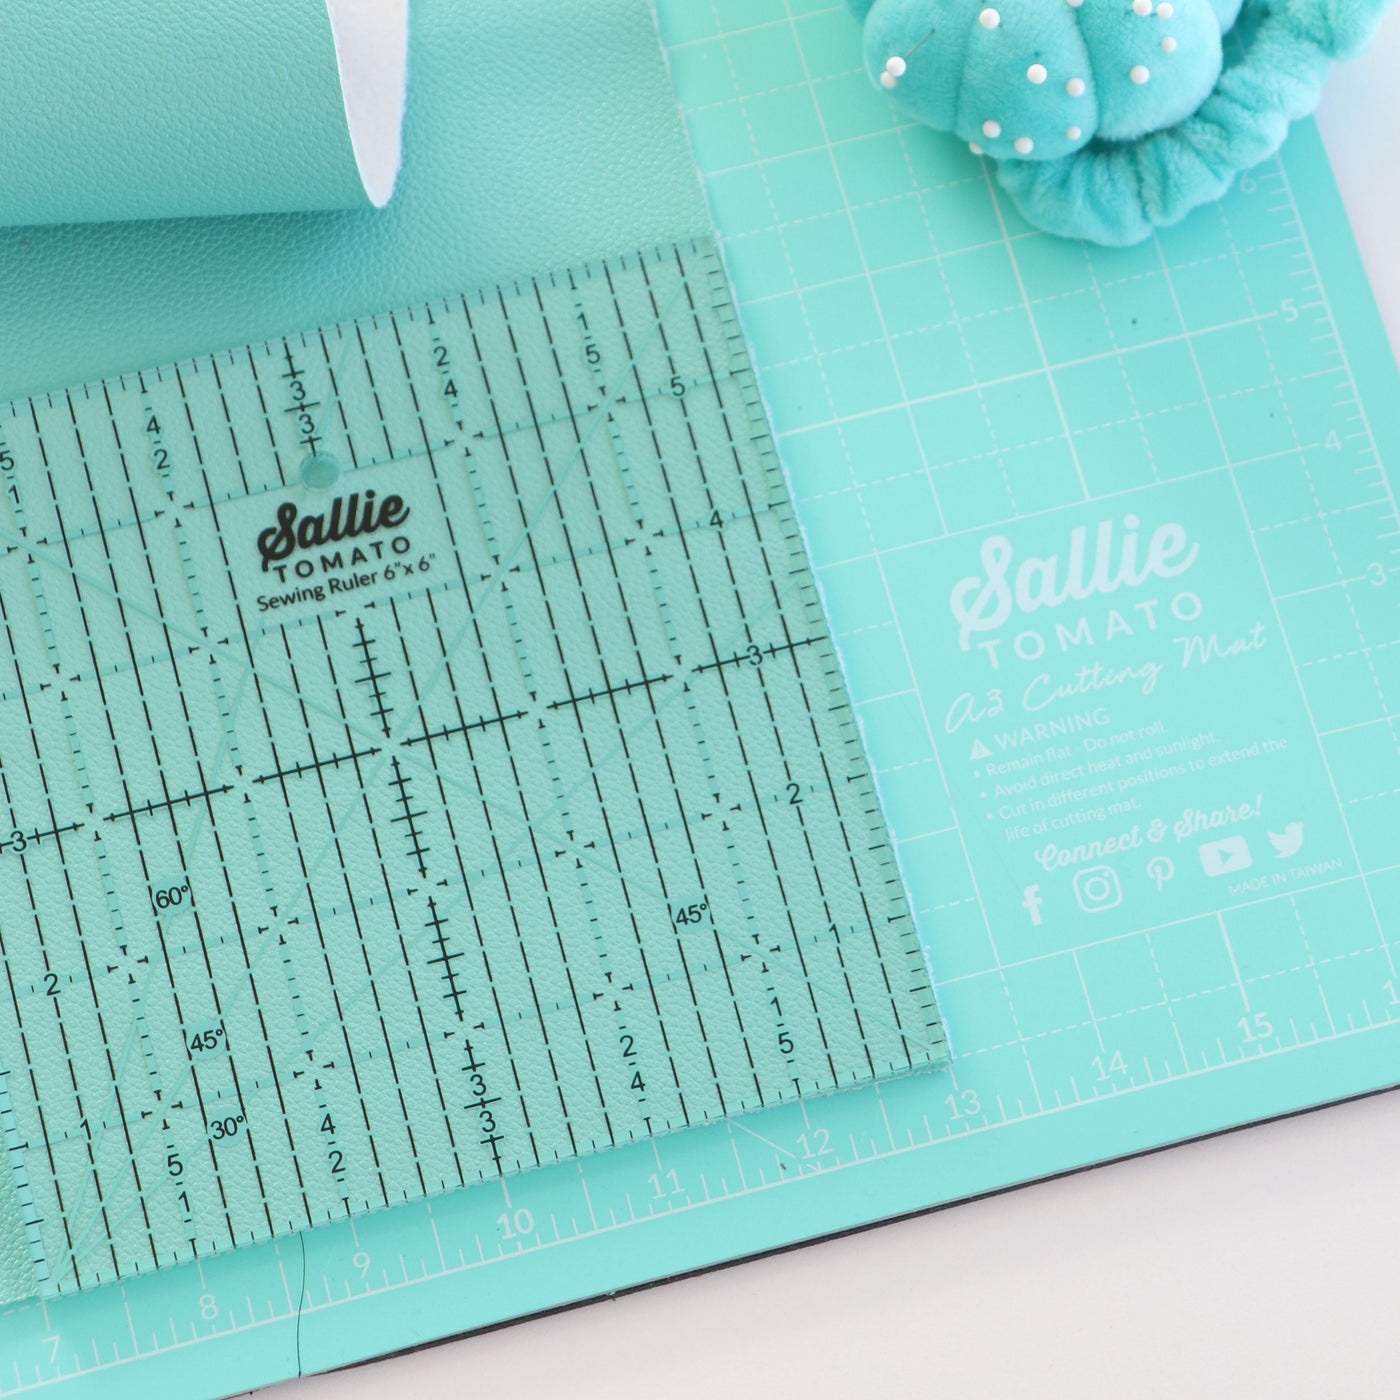 Sallie Tomato 6" x 6" Sewing & Quilting Ruler